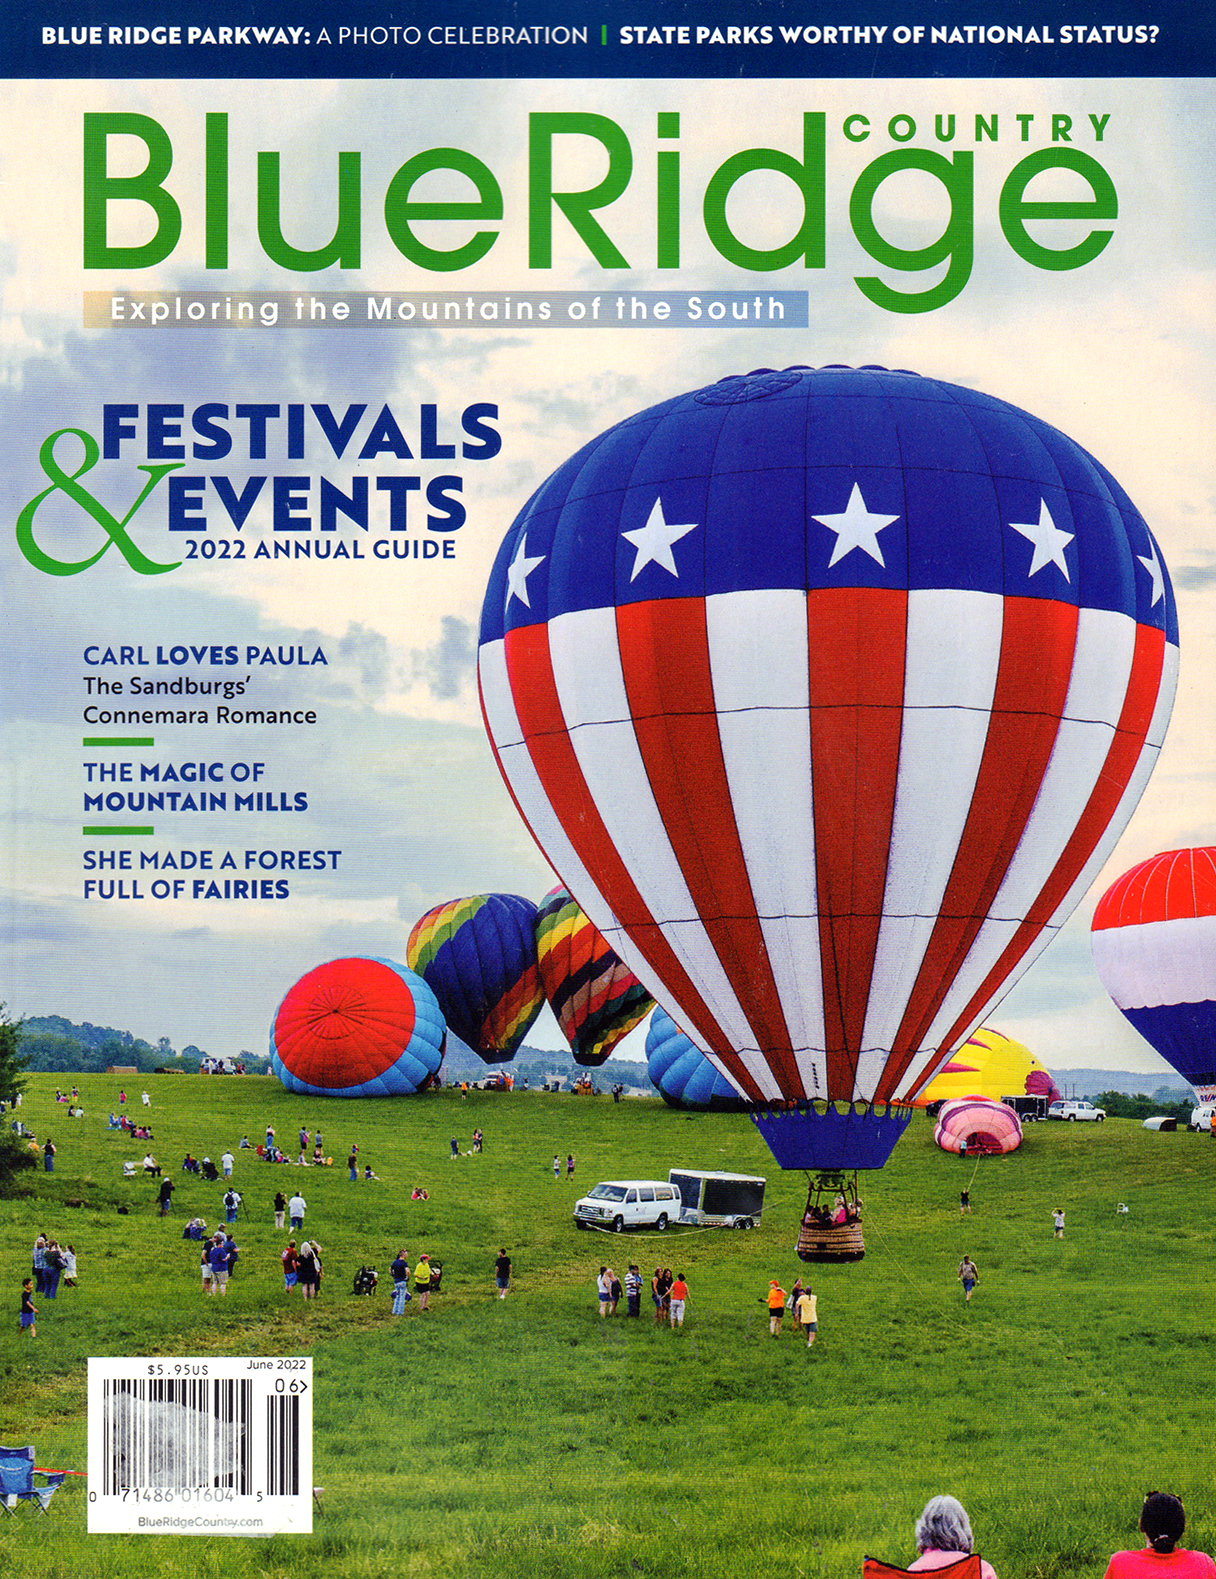 Subscribe to Blue Ridge Country Magazine